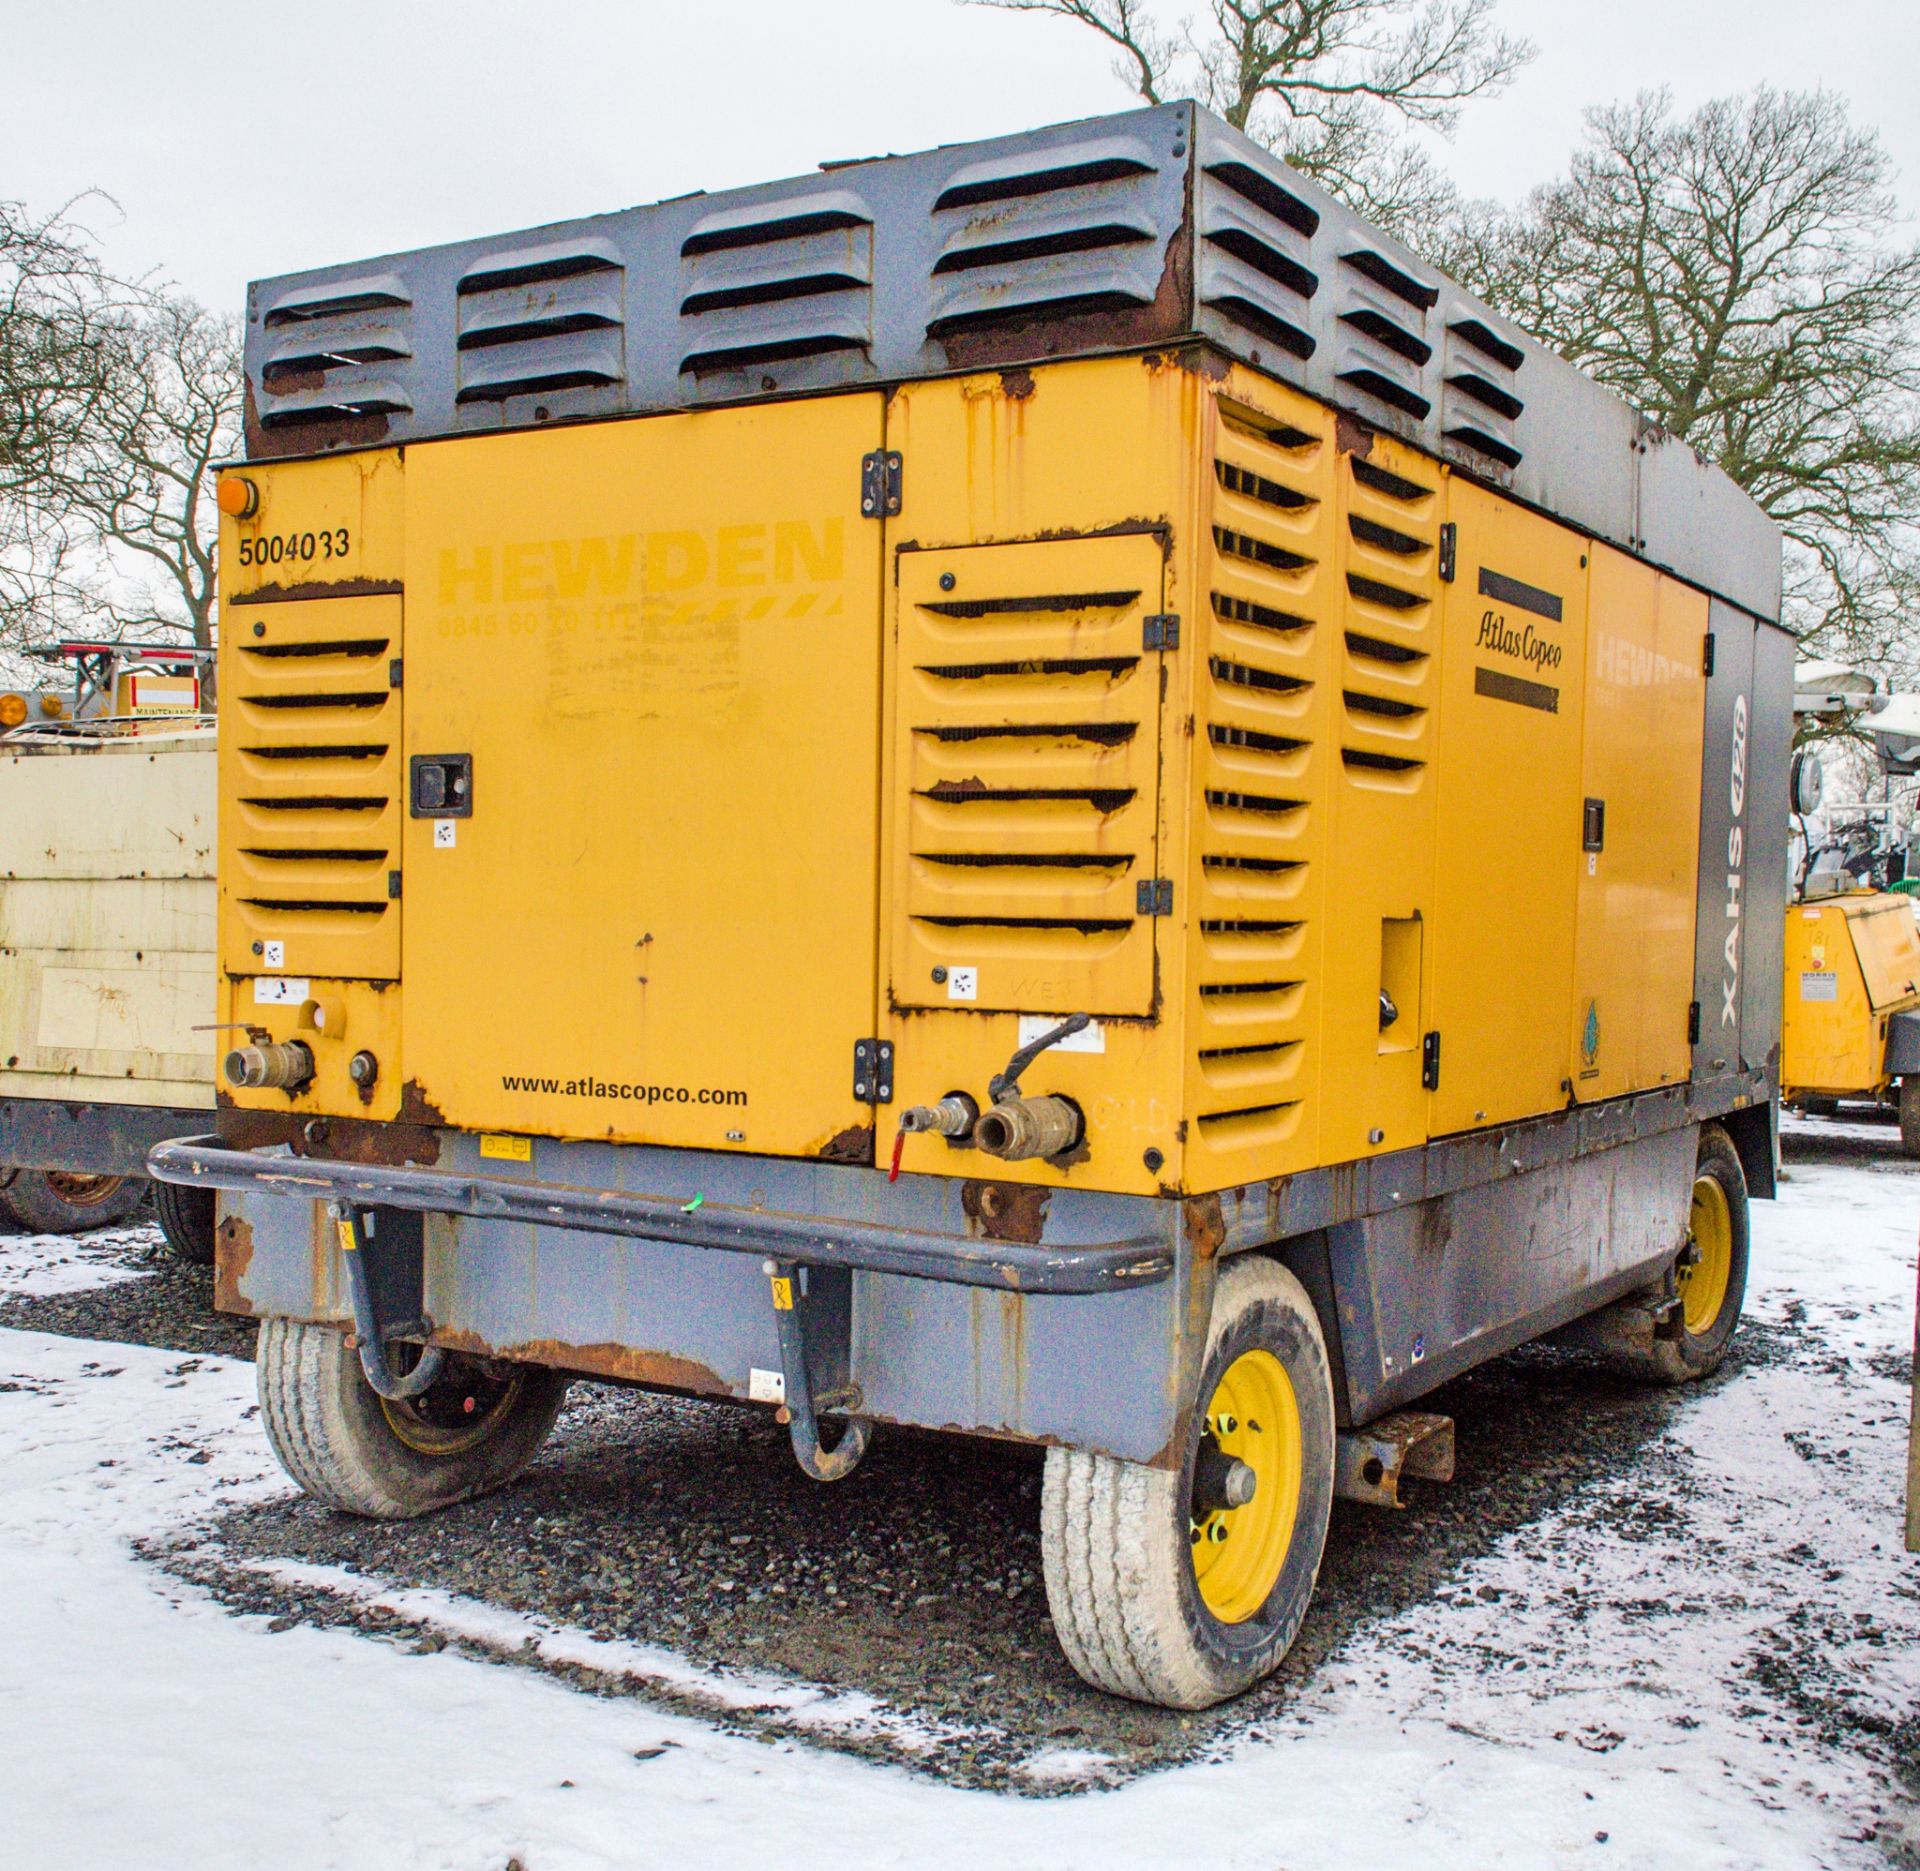 Atlas Copco XAHS 426 900 cfm diesel driven air compressor Year: 2008 S/N: 80706799 Recorded Hours: - Image 2 of 5